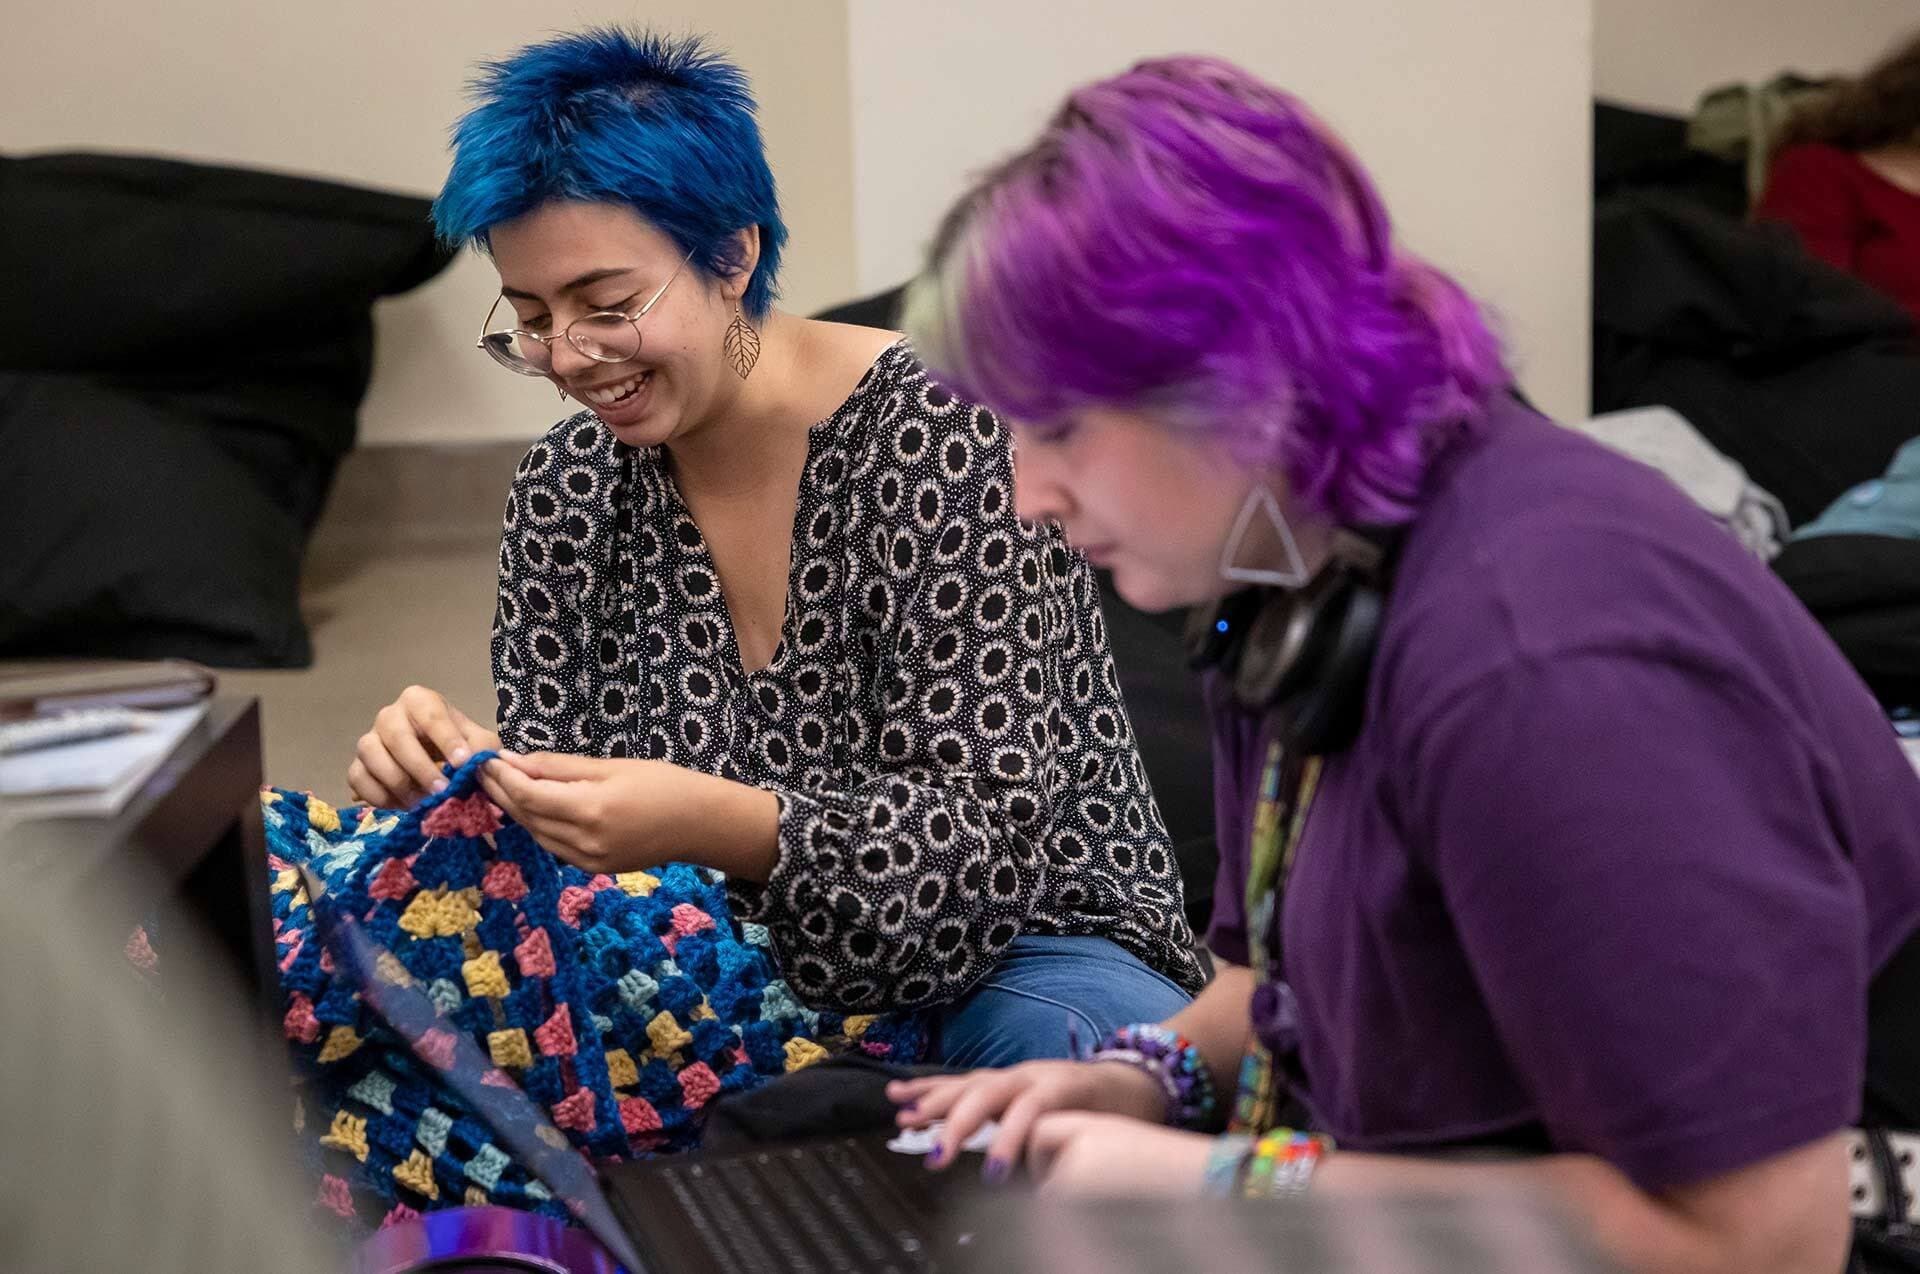 students with blue and purple hair smile over a colorful cloth and laptop